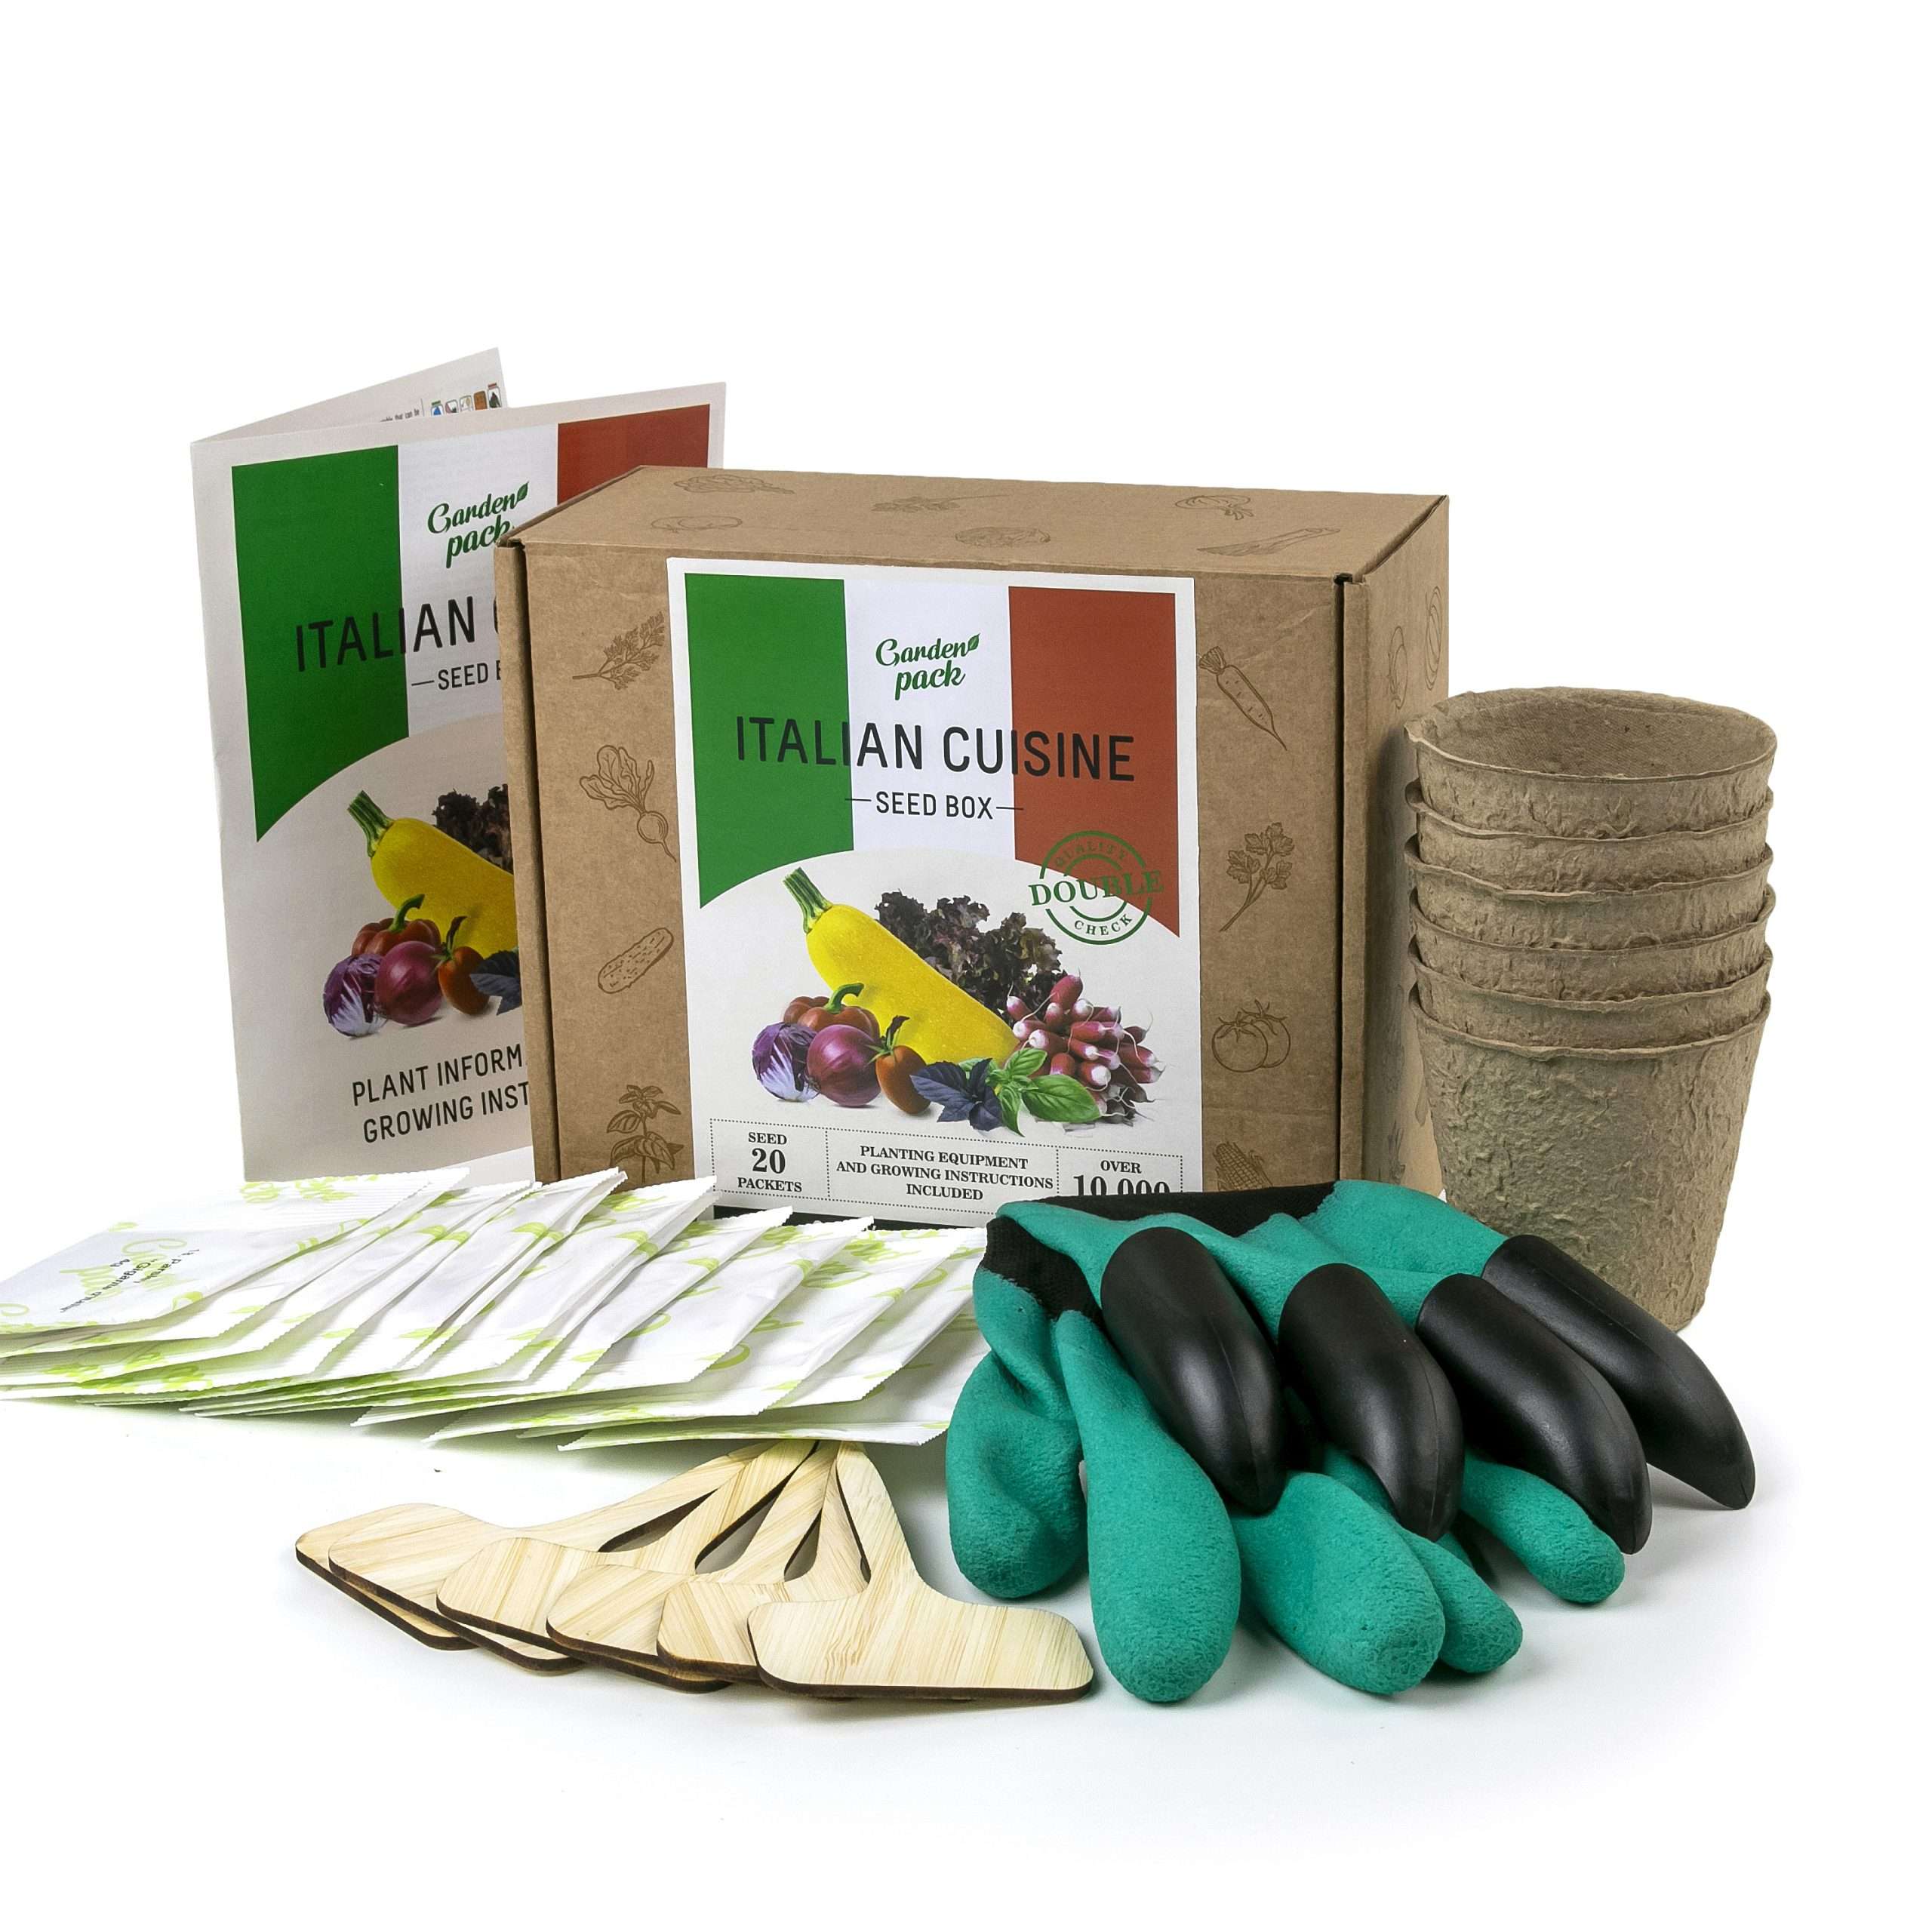 Garden rocket scaled GROW YOUR SEED COLLECTION of 20 most popular Italian ingredient varieties in one seed starter kit features veggies and culinary herb seeds no Italian dish can do without!   <strong>What's included:</strong> <ul> <li>20 of the most popular Italian ingredient varieties: Basil, Parsley, Oregano, Thyme, Marjoram, and more!</li> <li>2 high quality rubber Gardening Gloves with Claws;</li> <li>6 Biodegradable Peat Pots & 6 Bamboo Plant Markers</li> <li>Easy to follow growing guide;</li> <li>Low Shipping rates;</li> </ul>   <strong><span data-preserver-spaces="true">OUR BEST VALUE GARDENING KIT</span></strong><span data-preserver-spaces="true"> to save money, reduce your carbon footprint & celebrate the natural powers of plants with your vegetable plants & seeds.</span>  